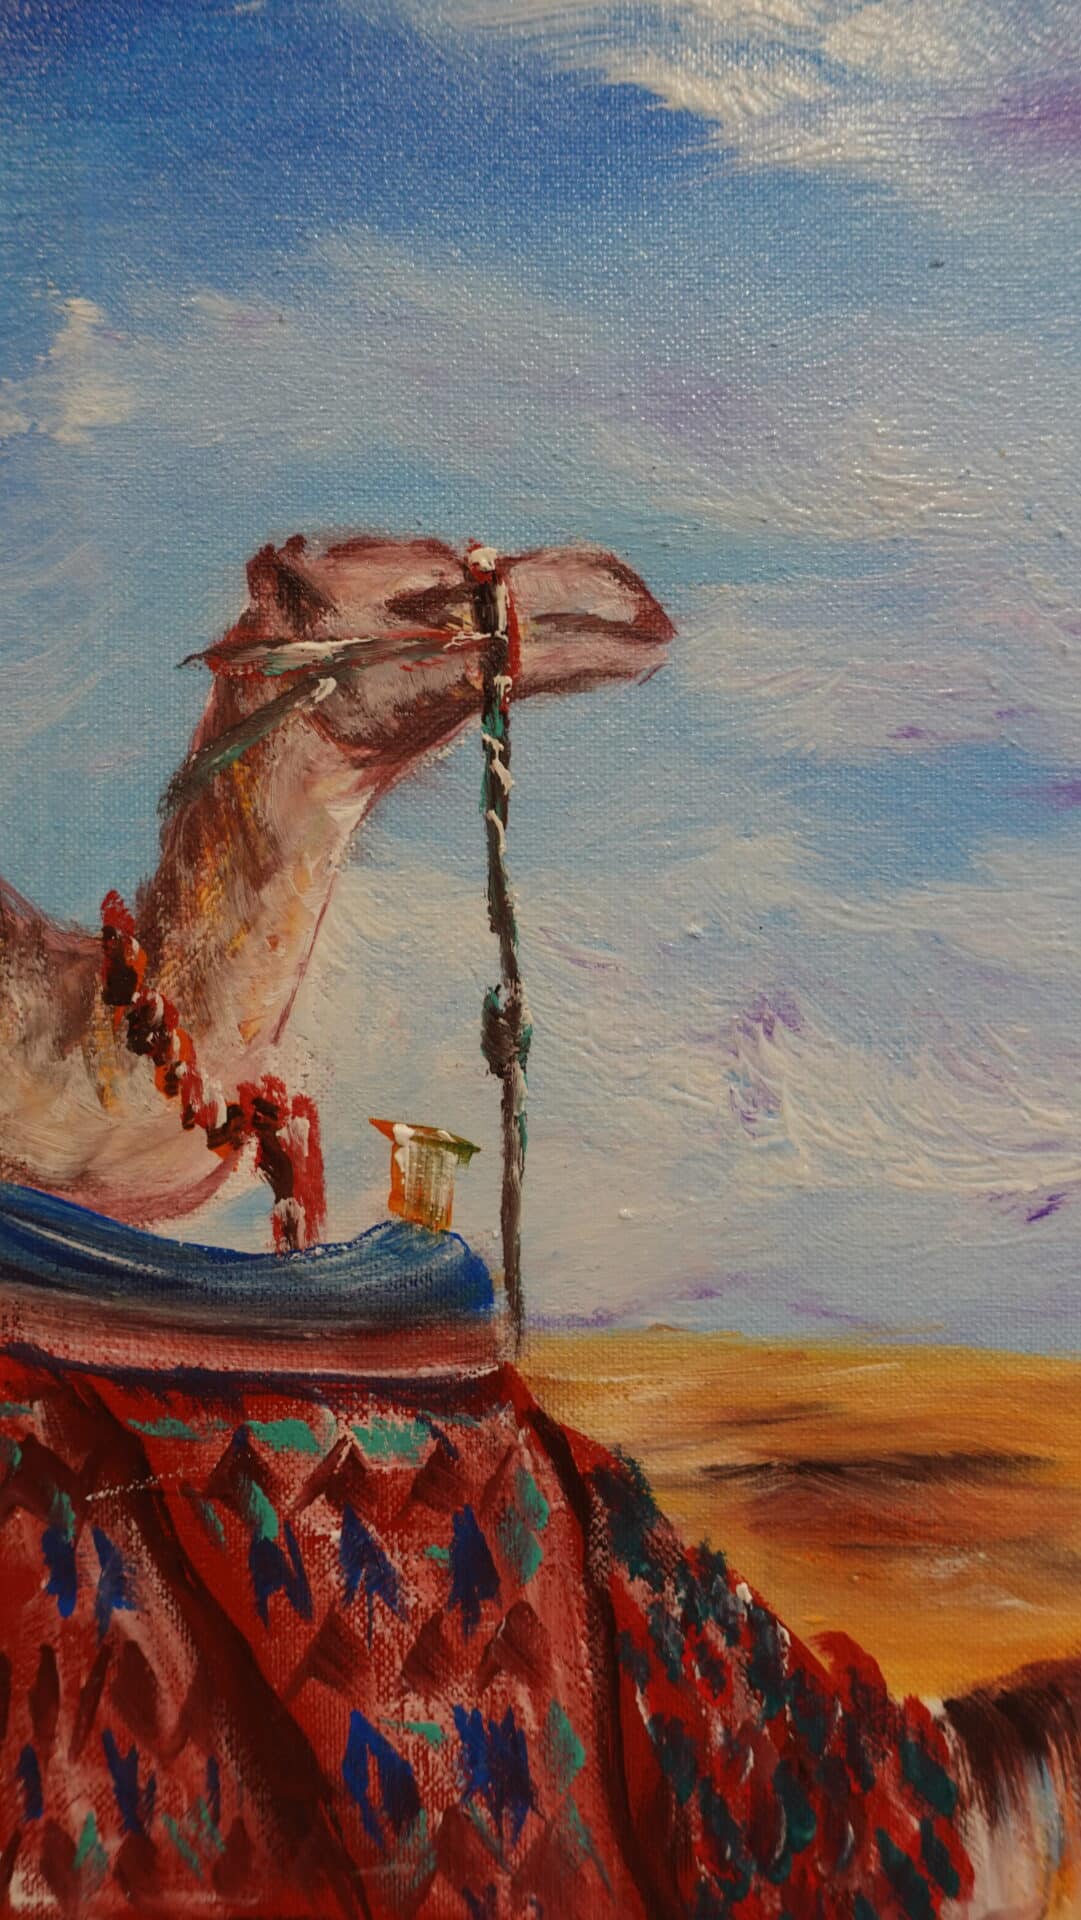 Camels in the desert 60 x 40 cm